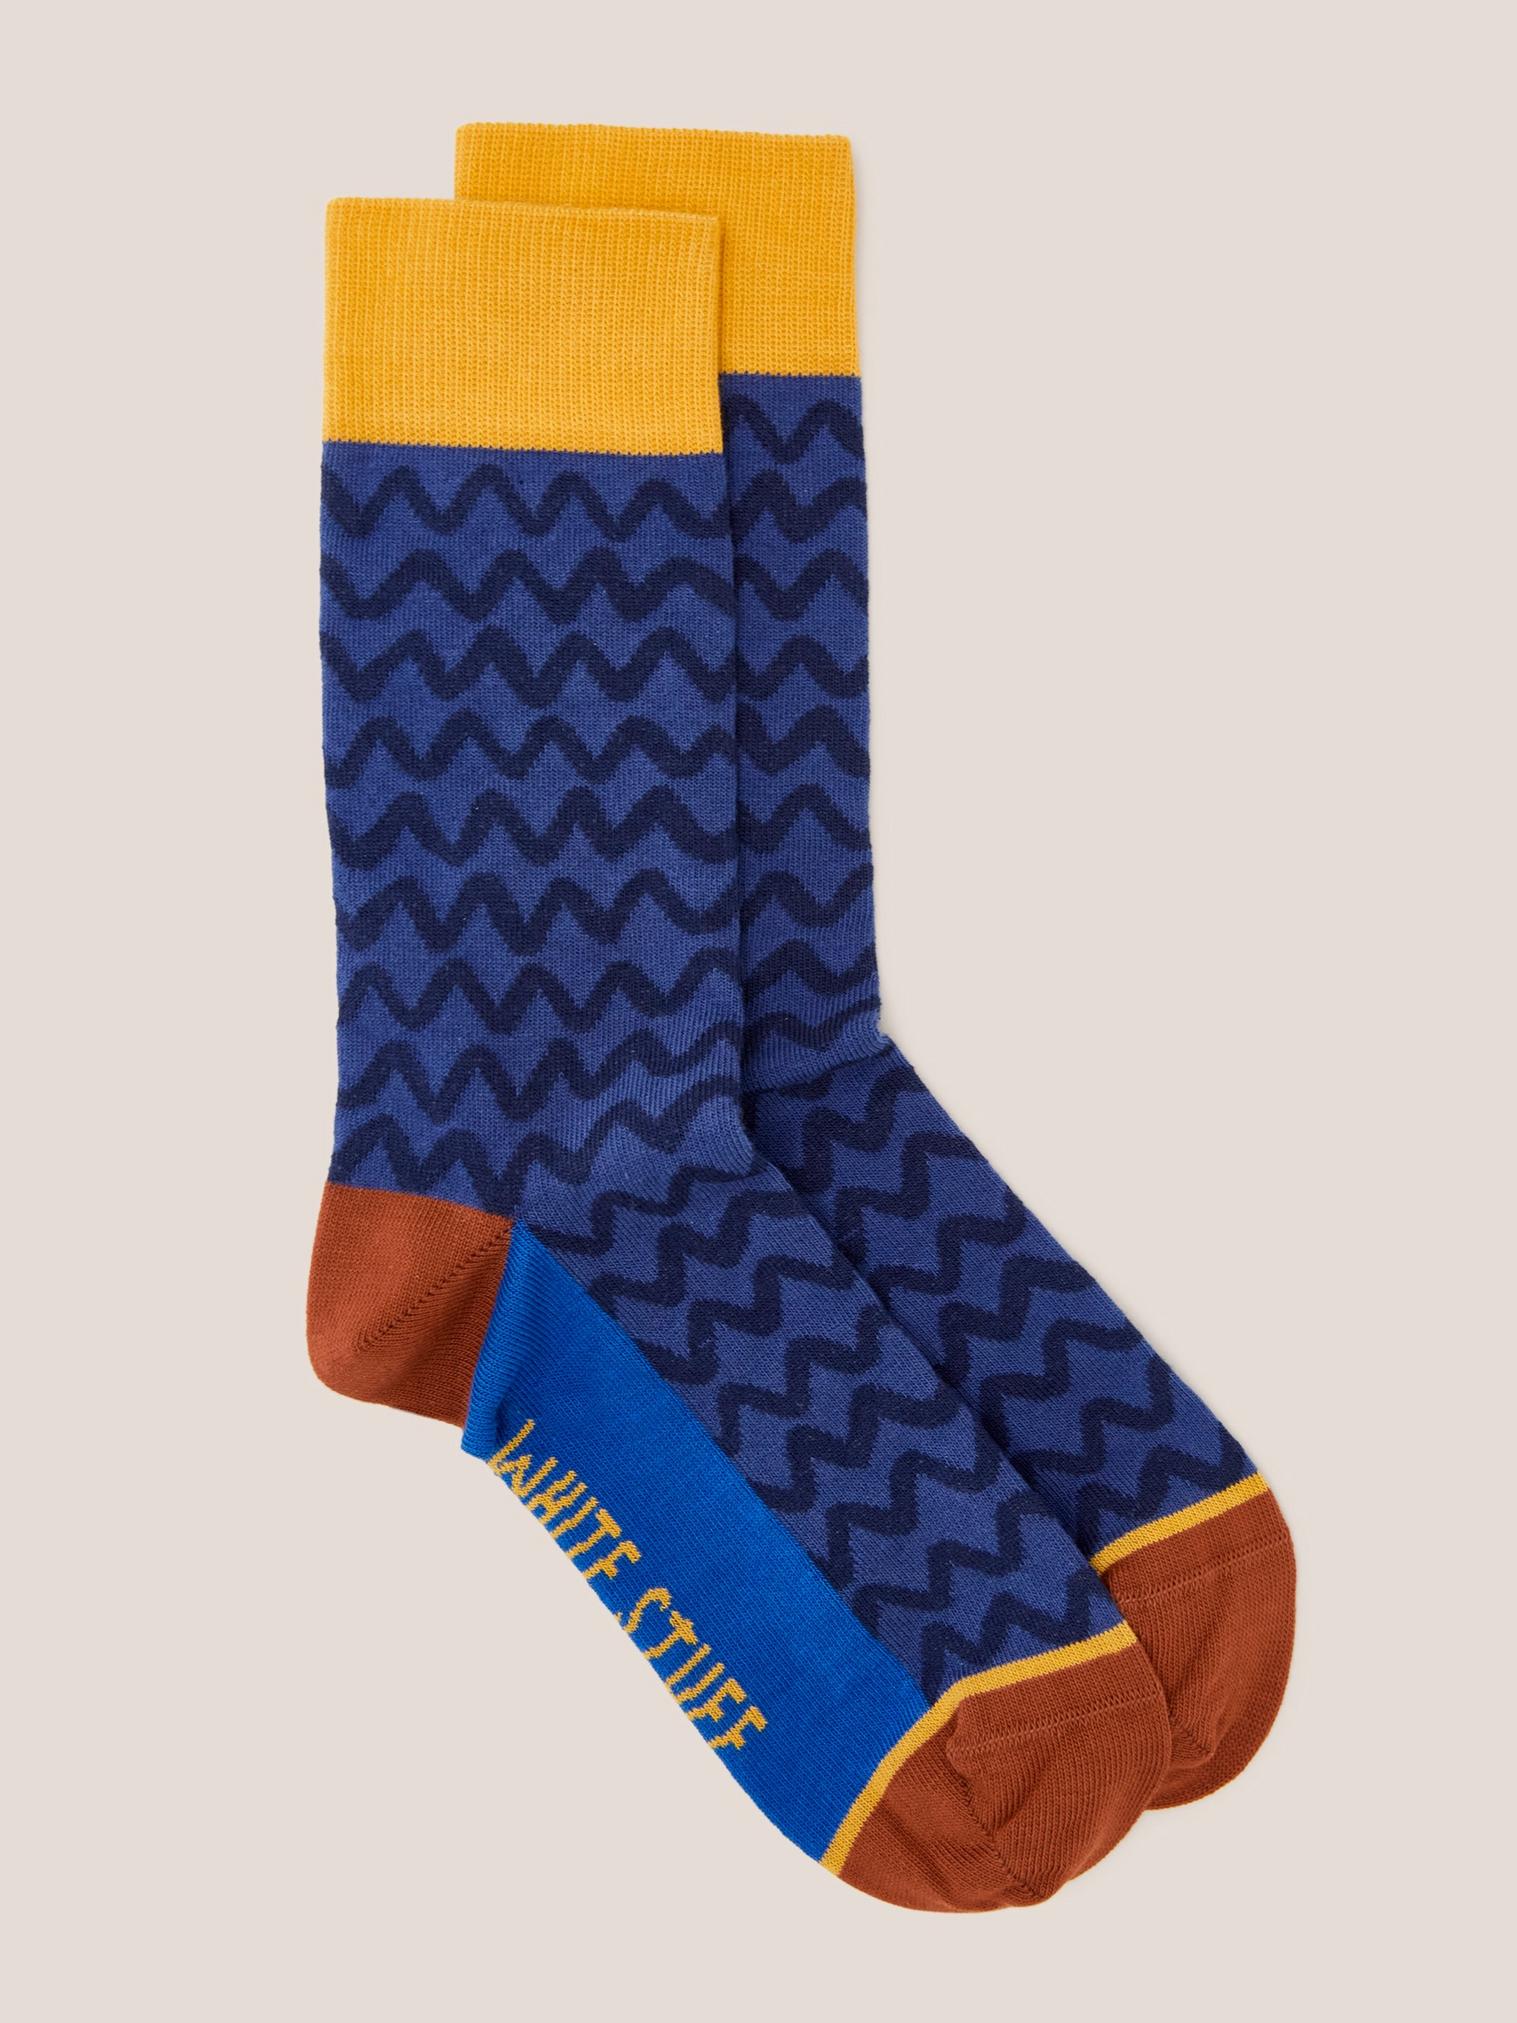 Squiggly Stripe Ankle Sock in NAVY MULTI - FLAT FRONT